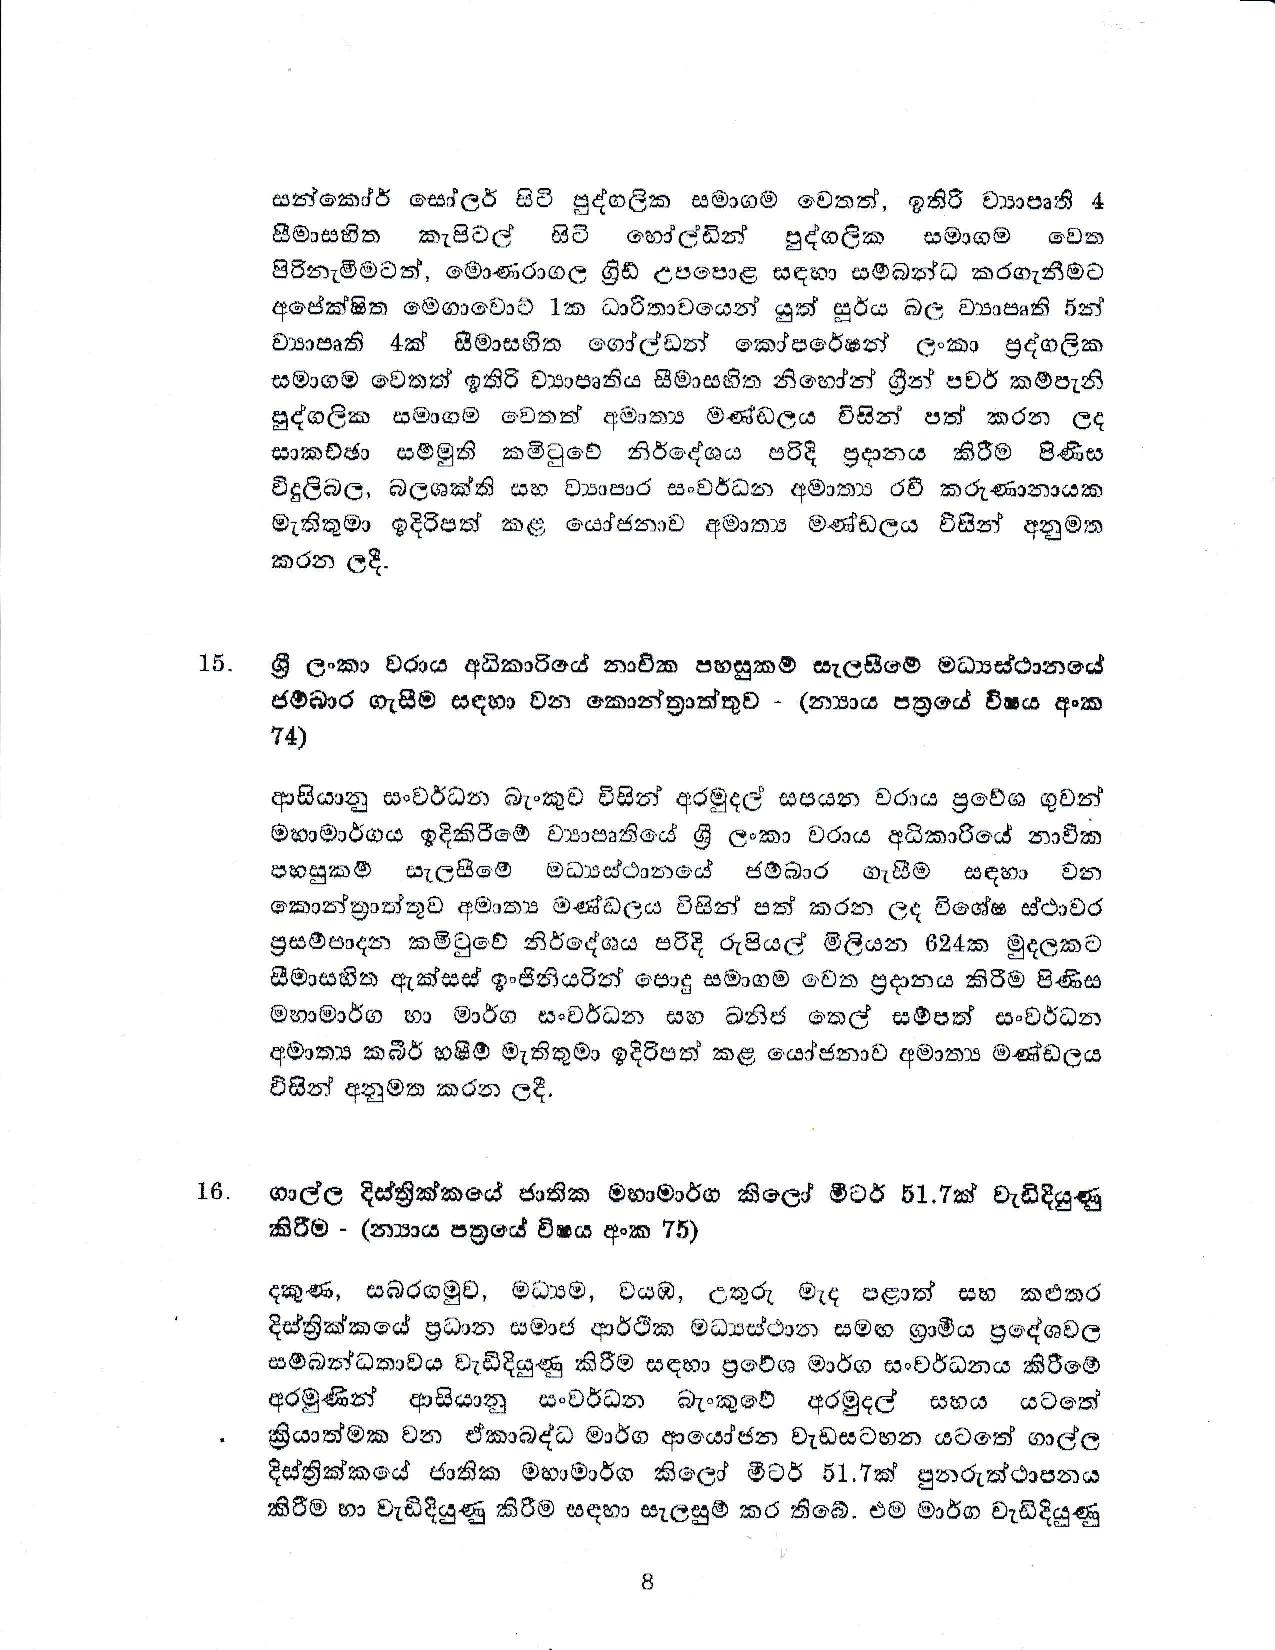 Cabinet Decision on 28.05.2019 page 008